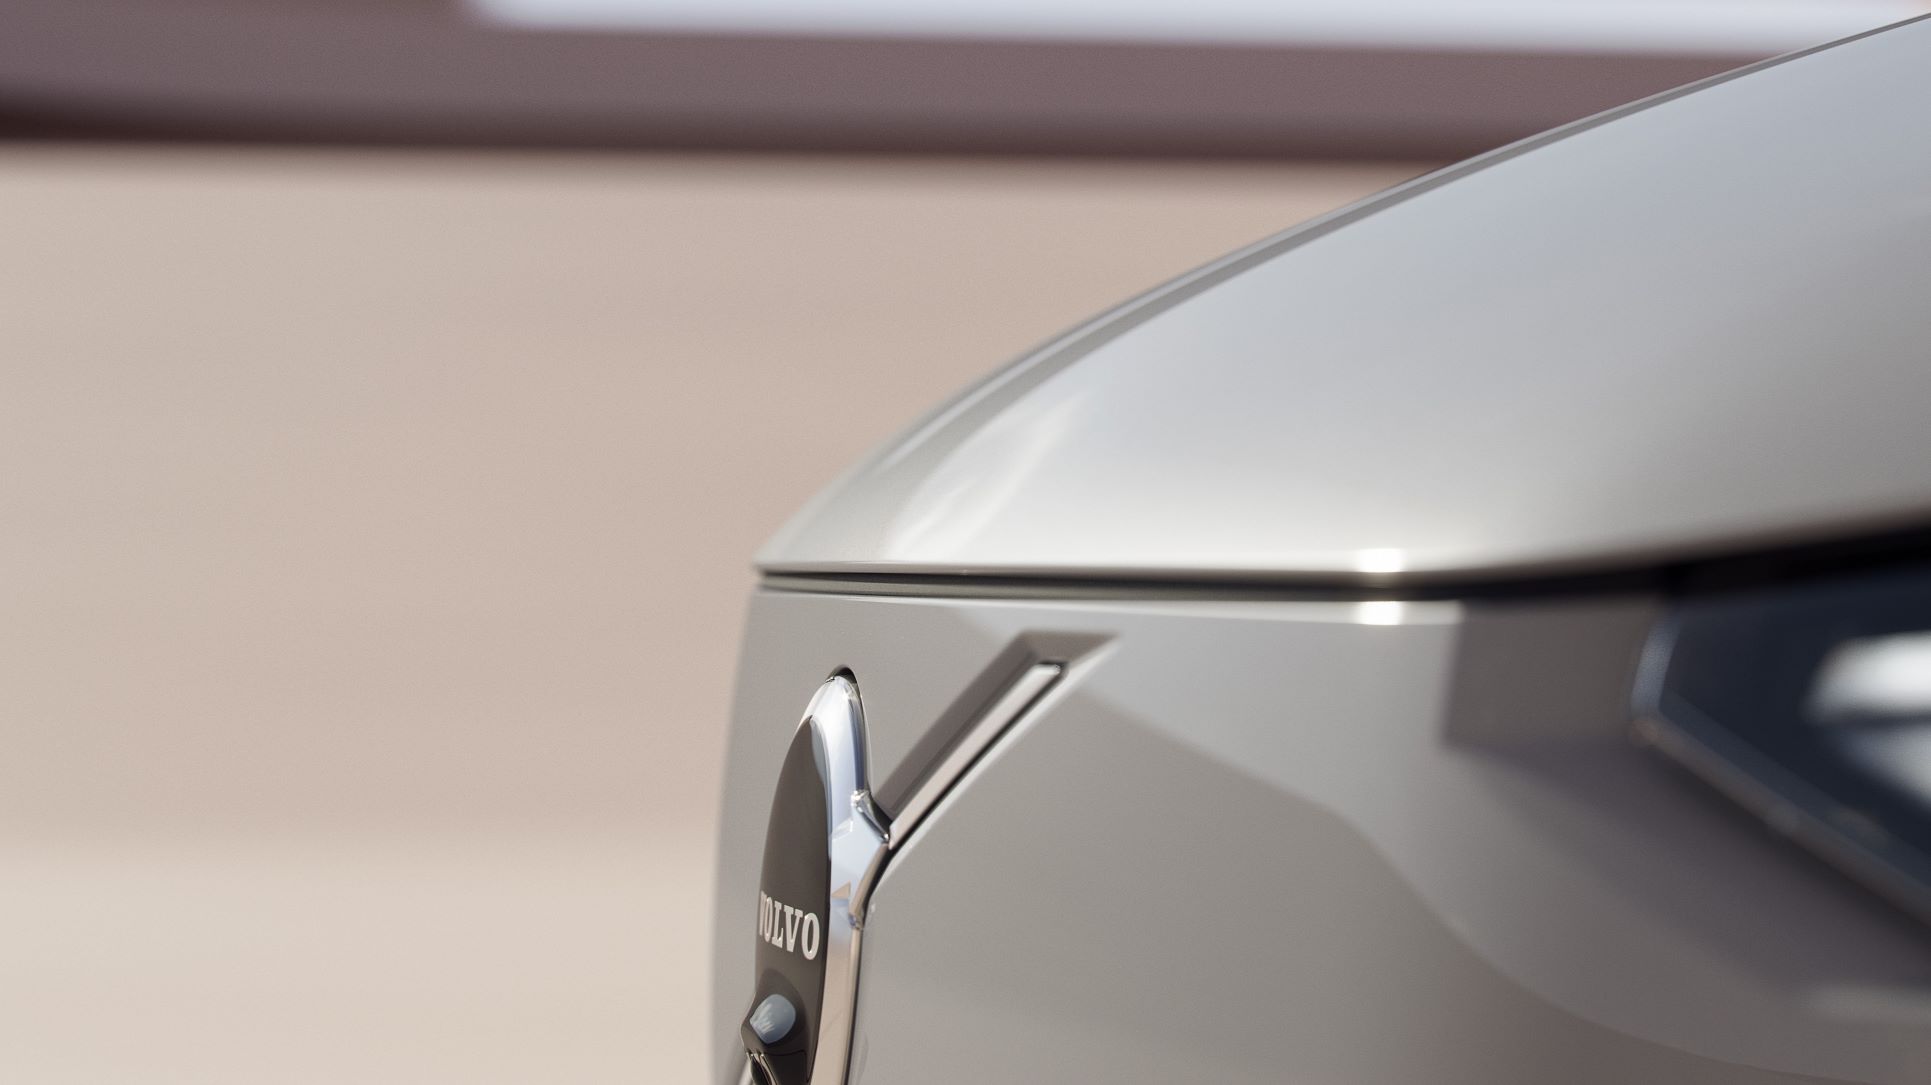 Teaser image of the Volvo badge on the nose of the new Volvo EX90 EV